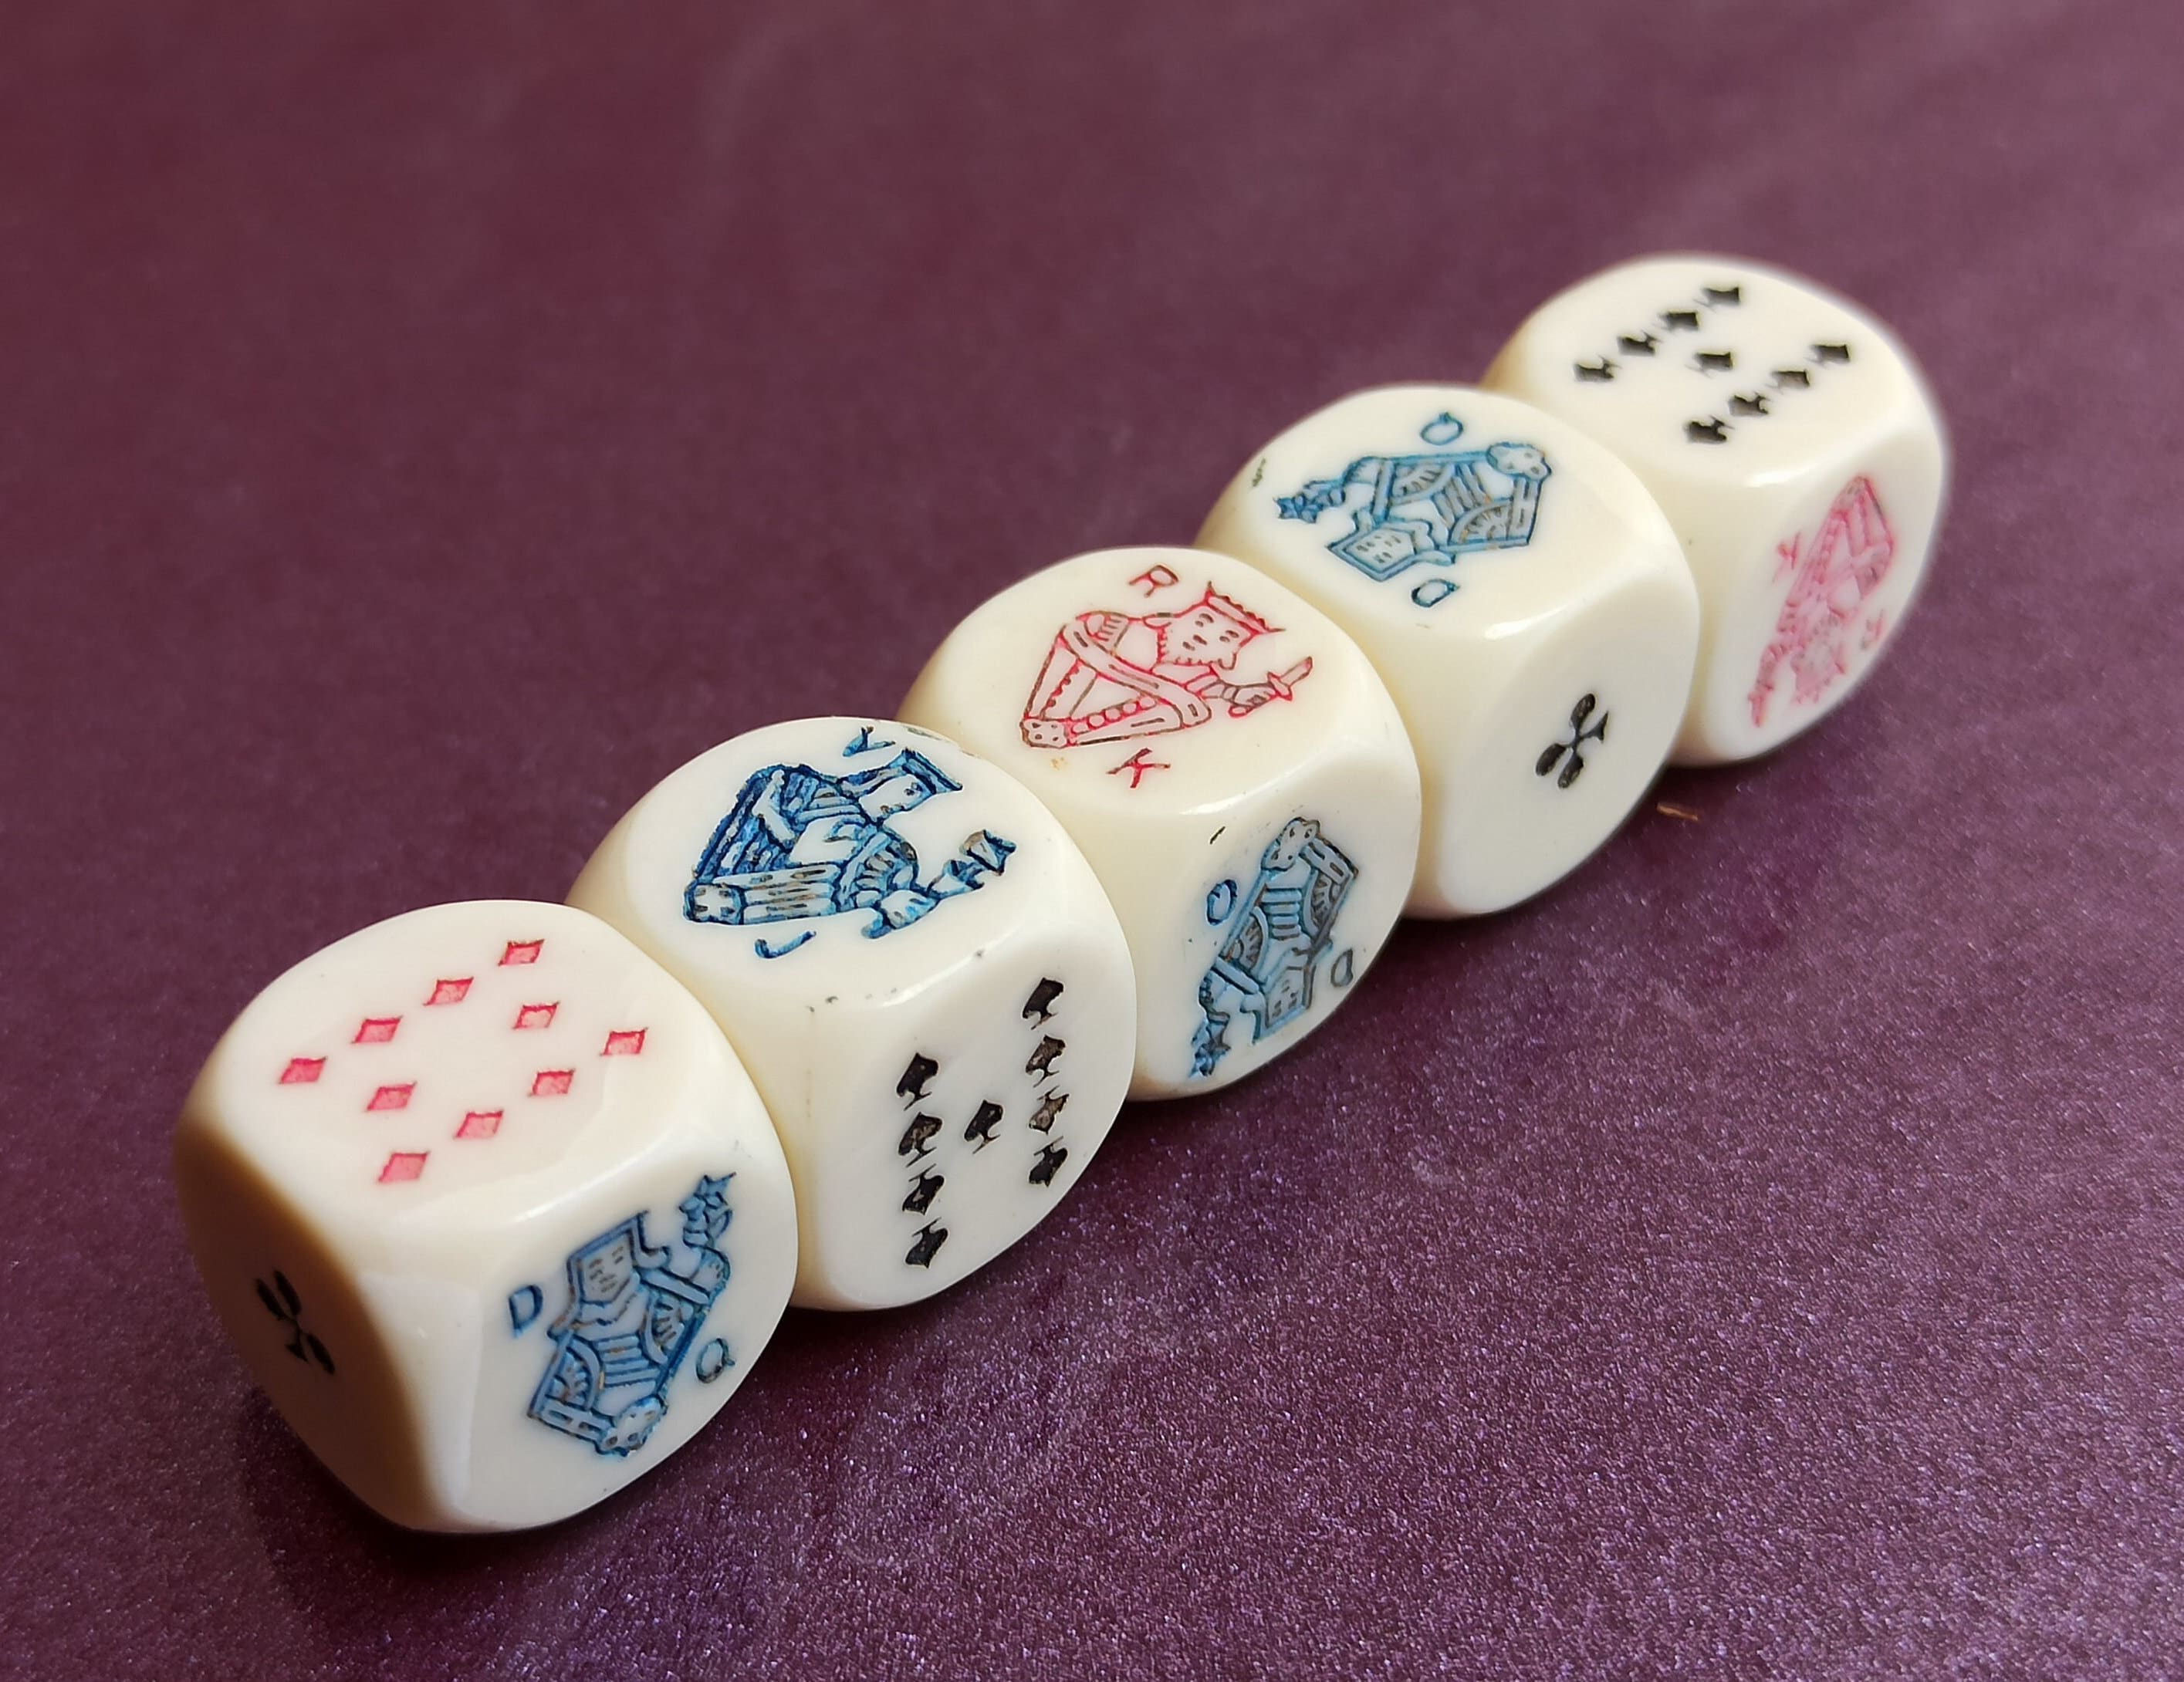 The Legendary Poker Dice Champions of Yesteryears.